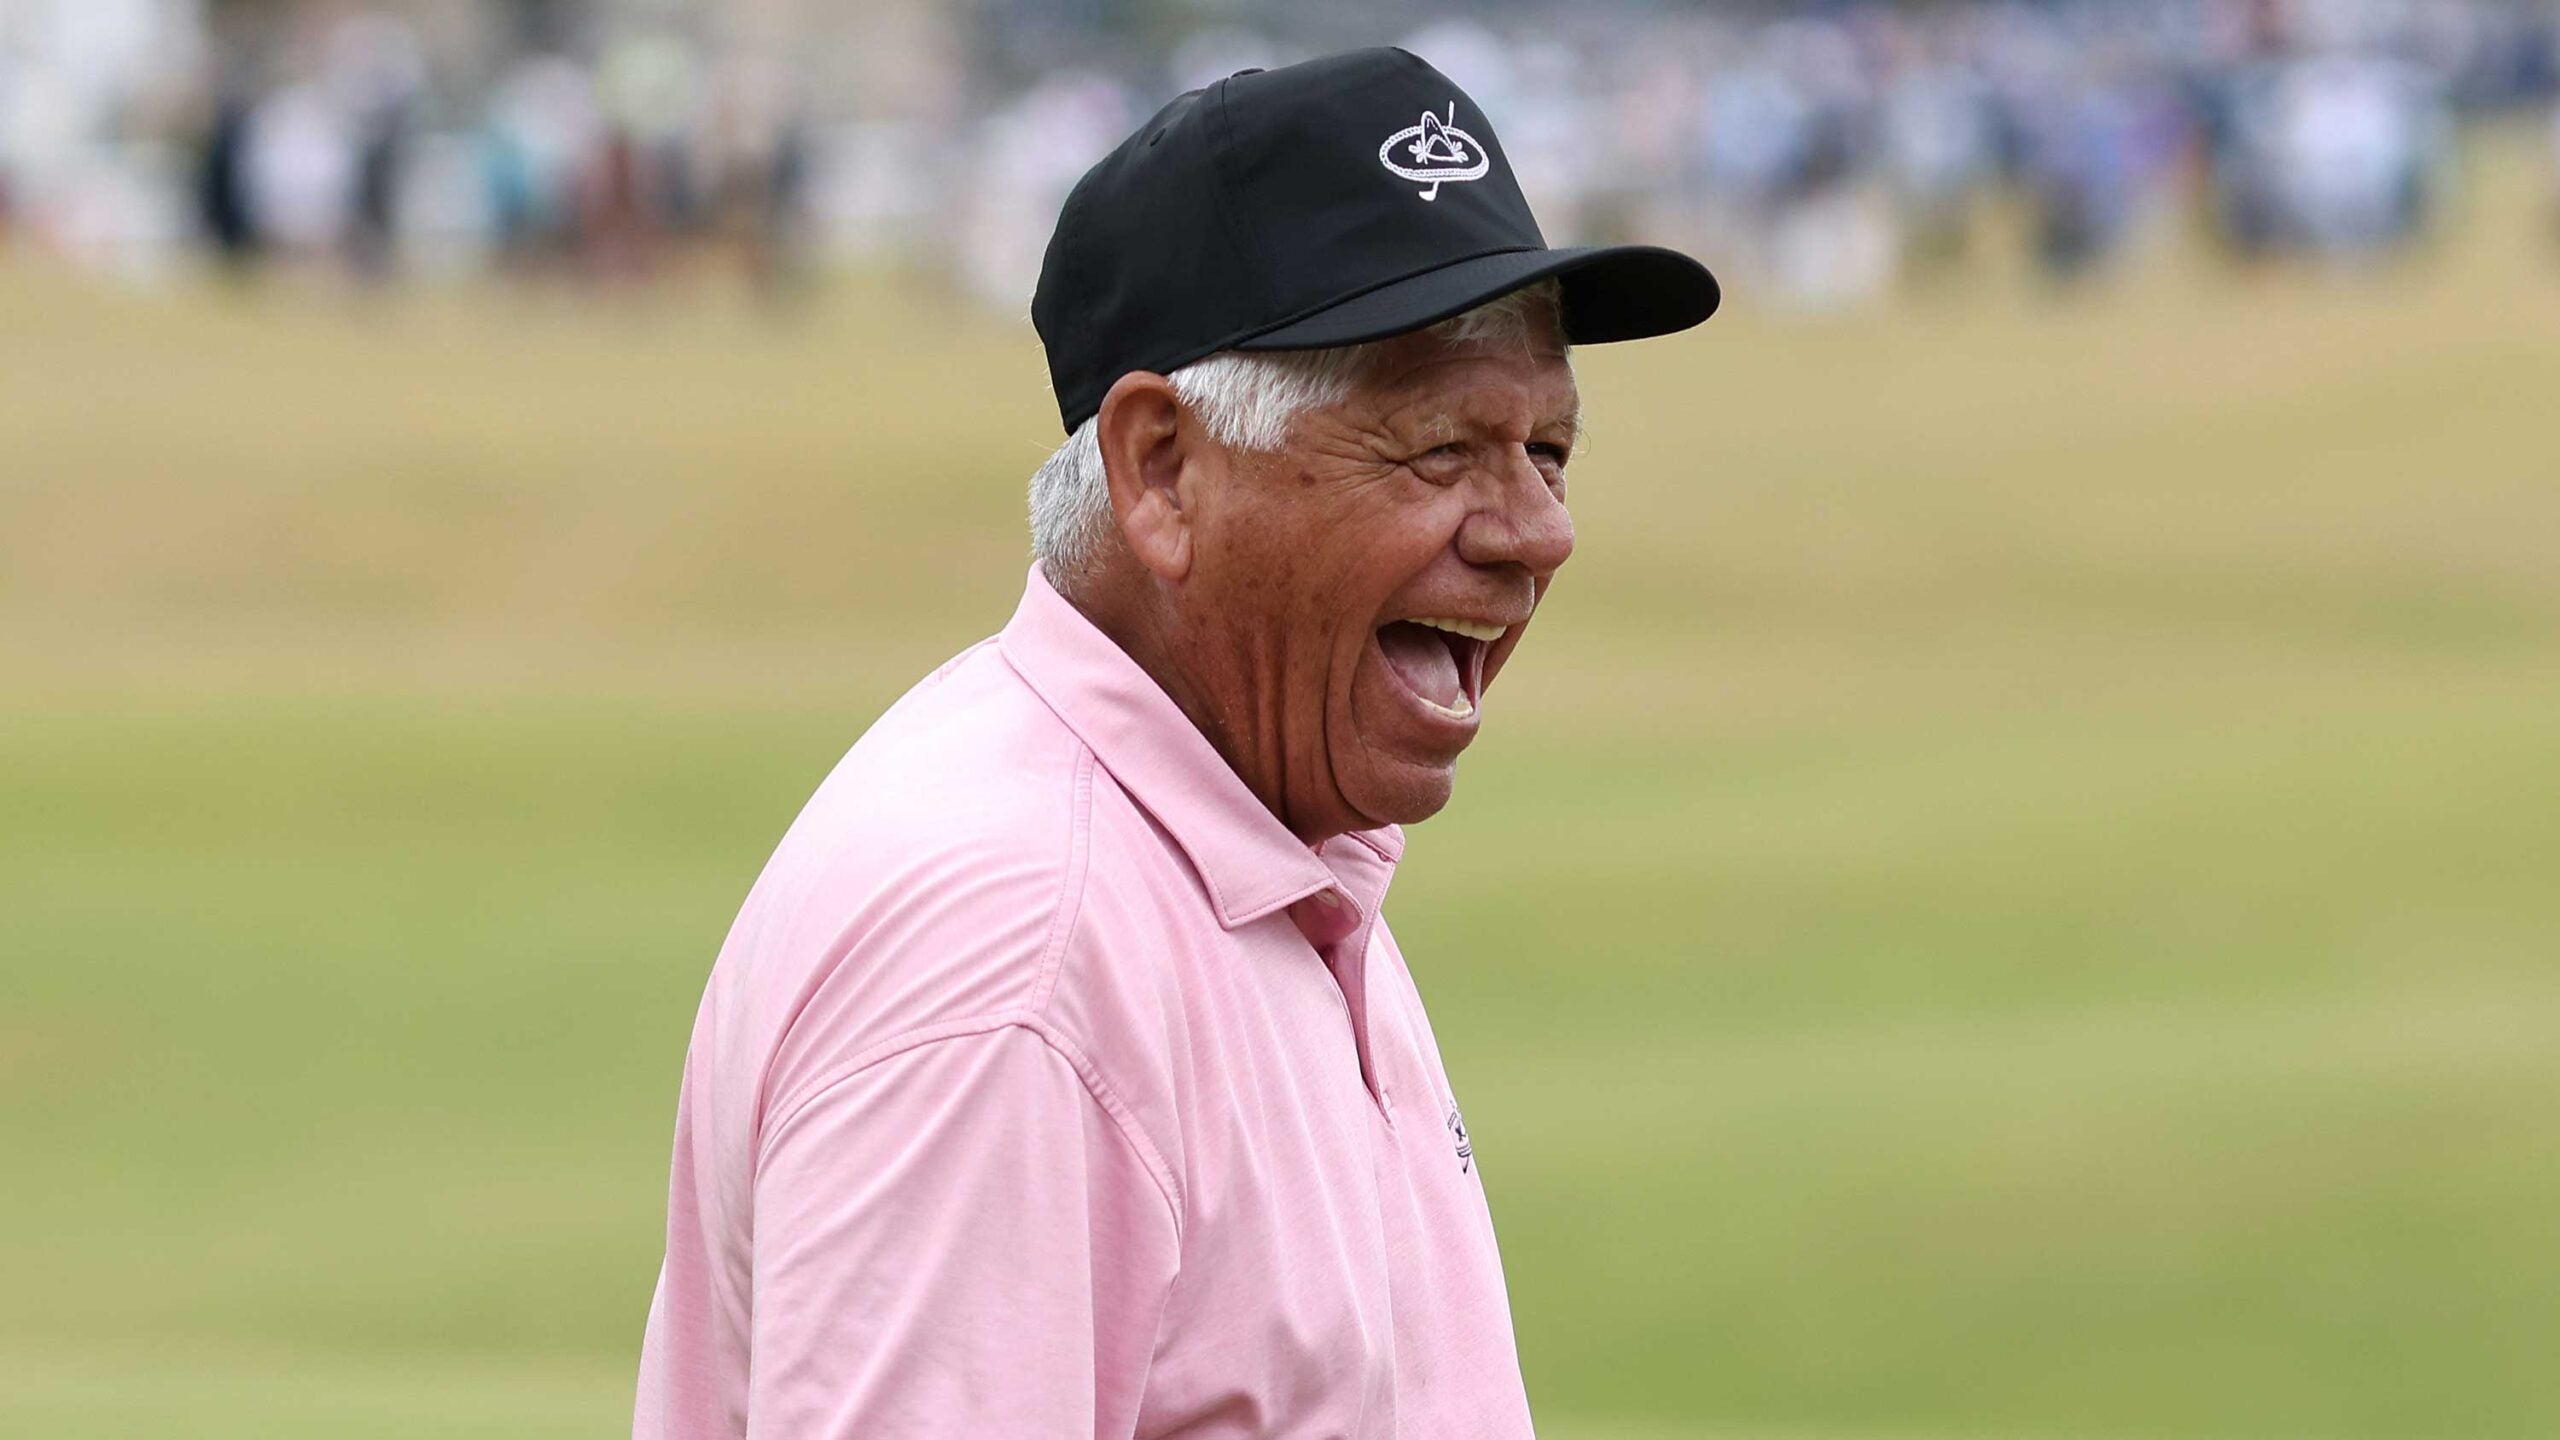 British Open 2022: Lee Trevino, the last pure golfer, steals the